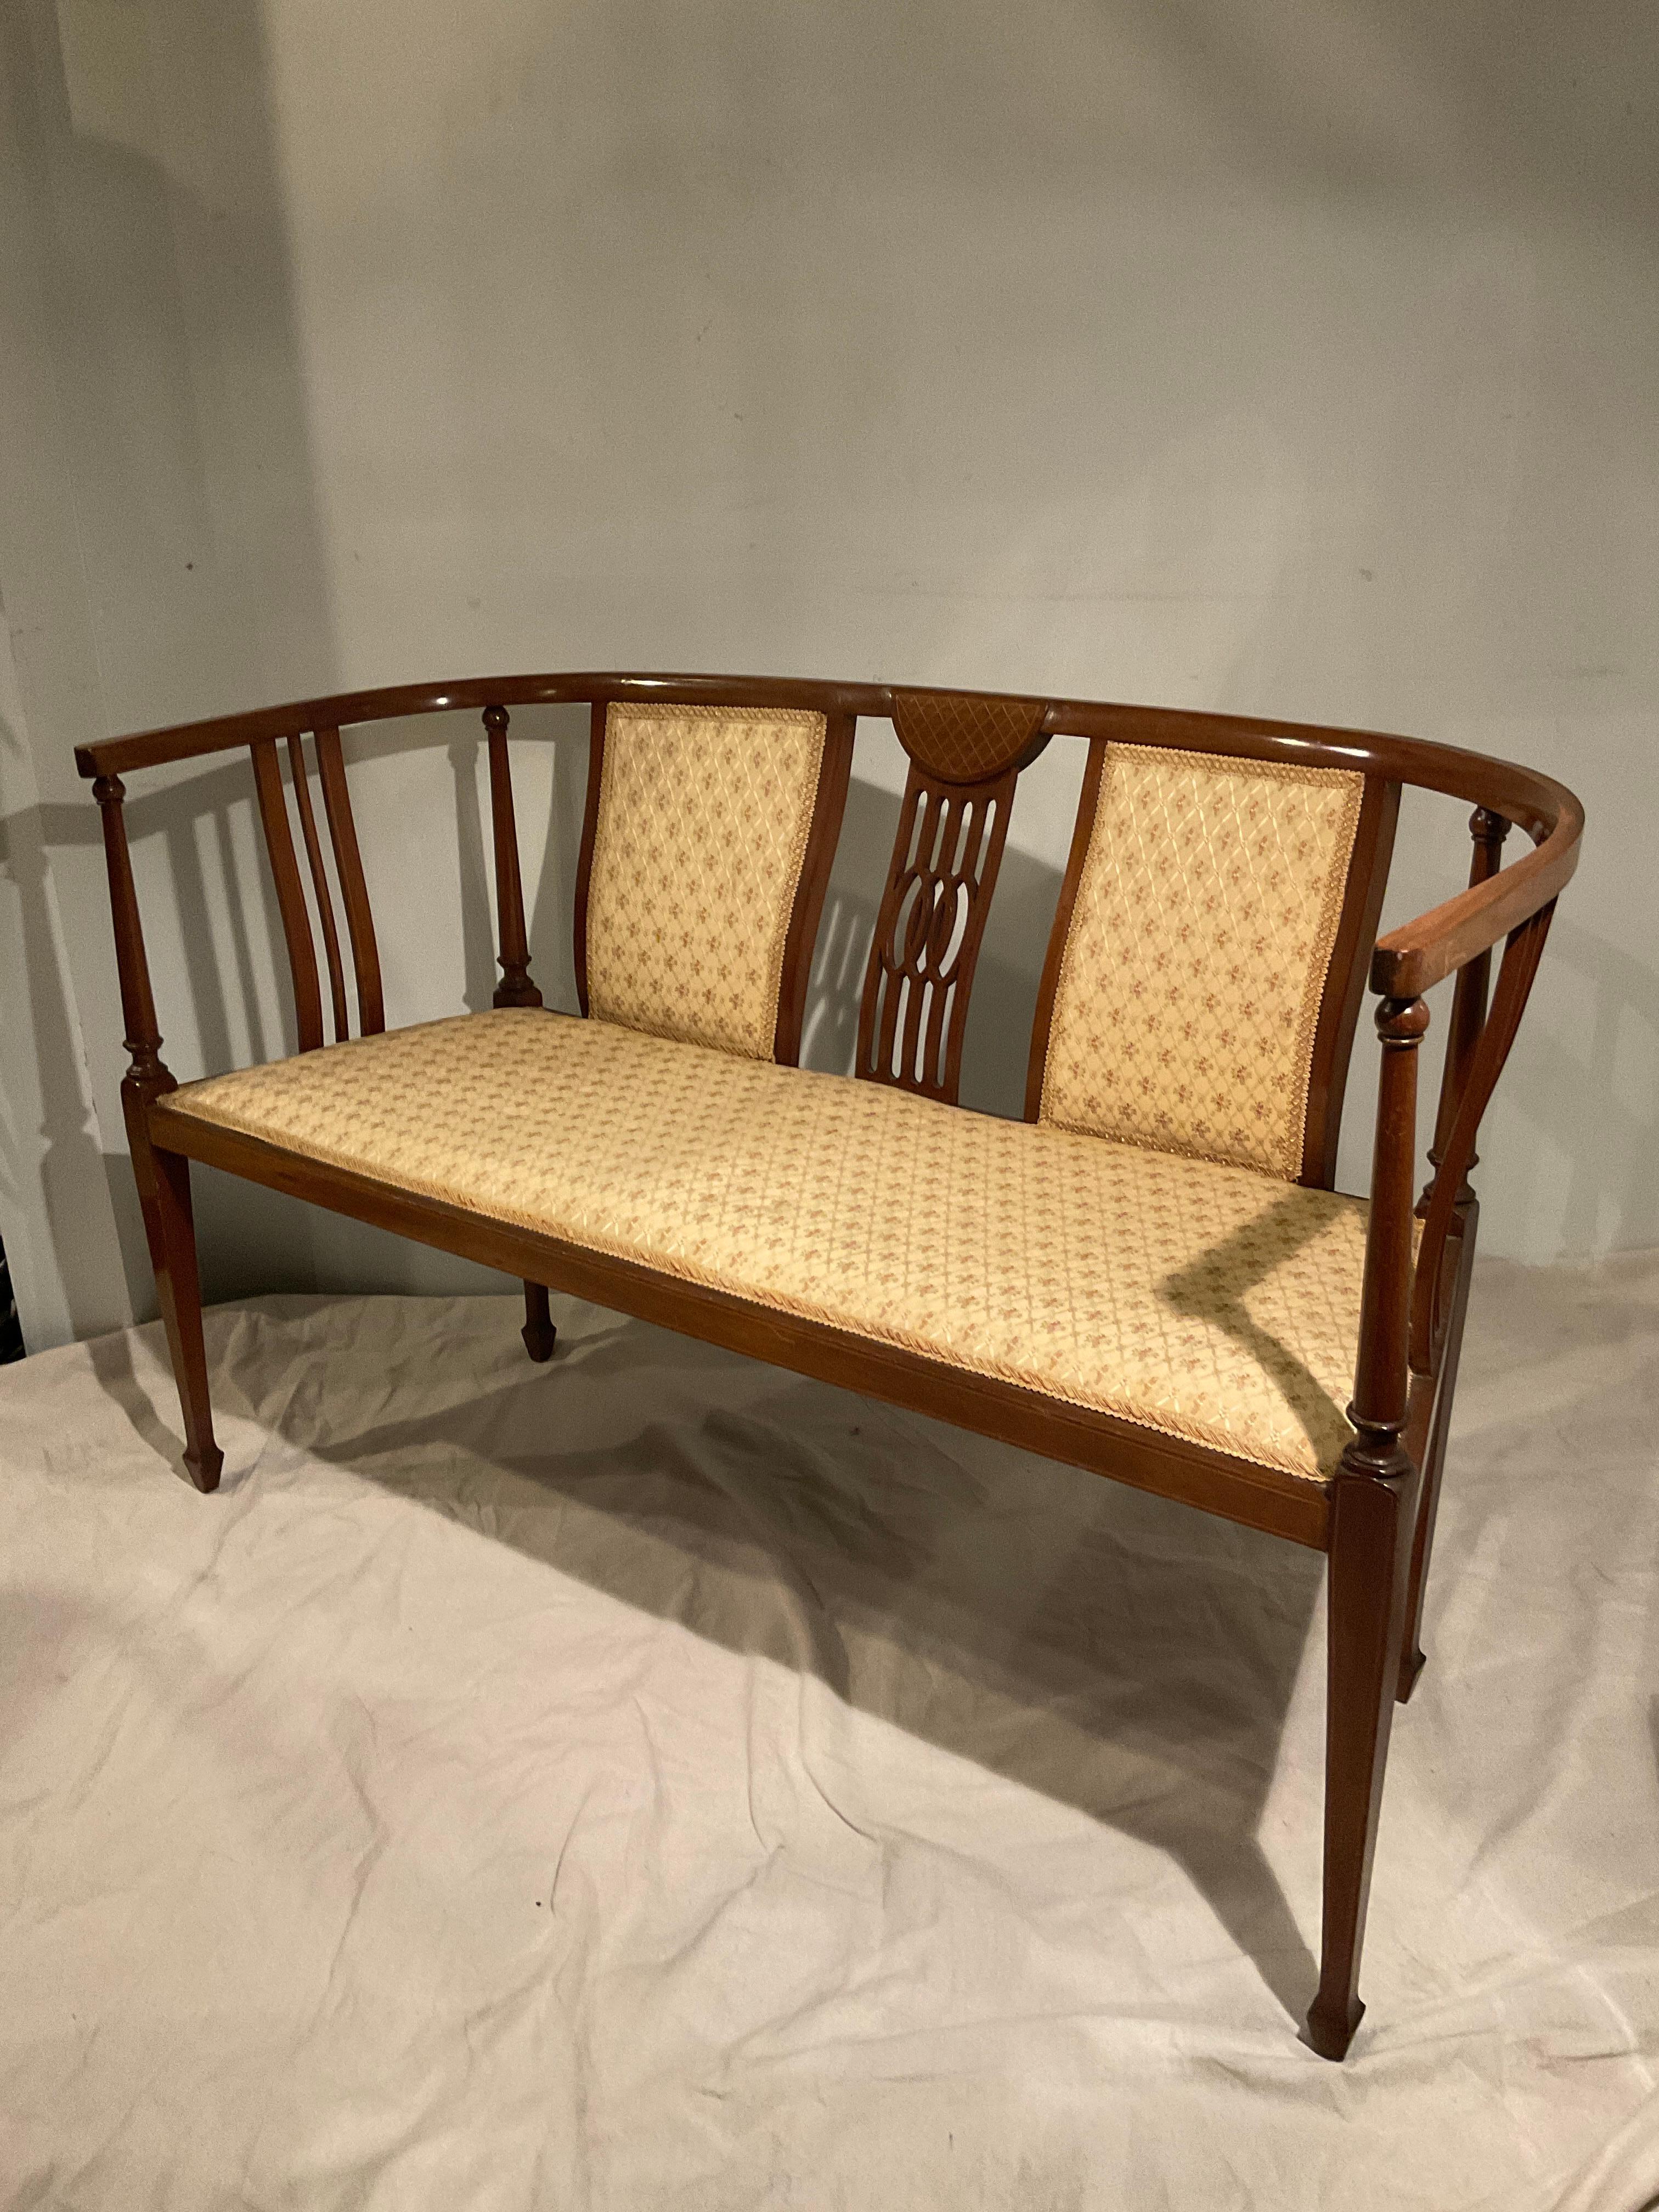 1910 Art Nouveau Inlaid Settee In Good Condition For Sale In Tarrytown, NY